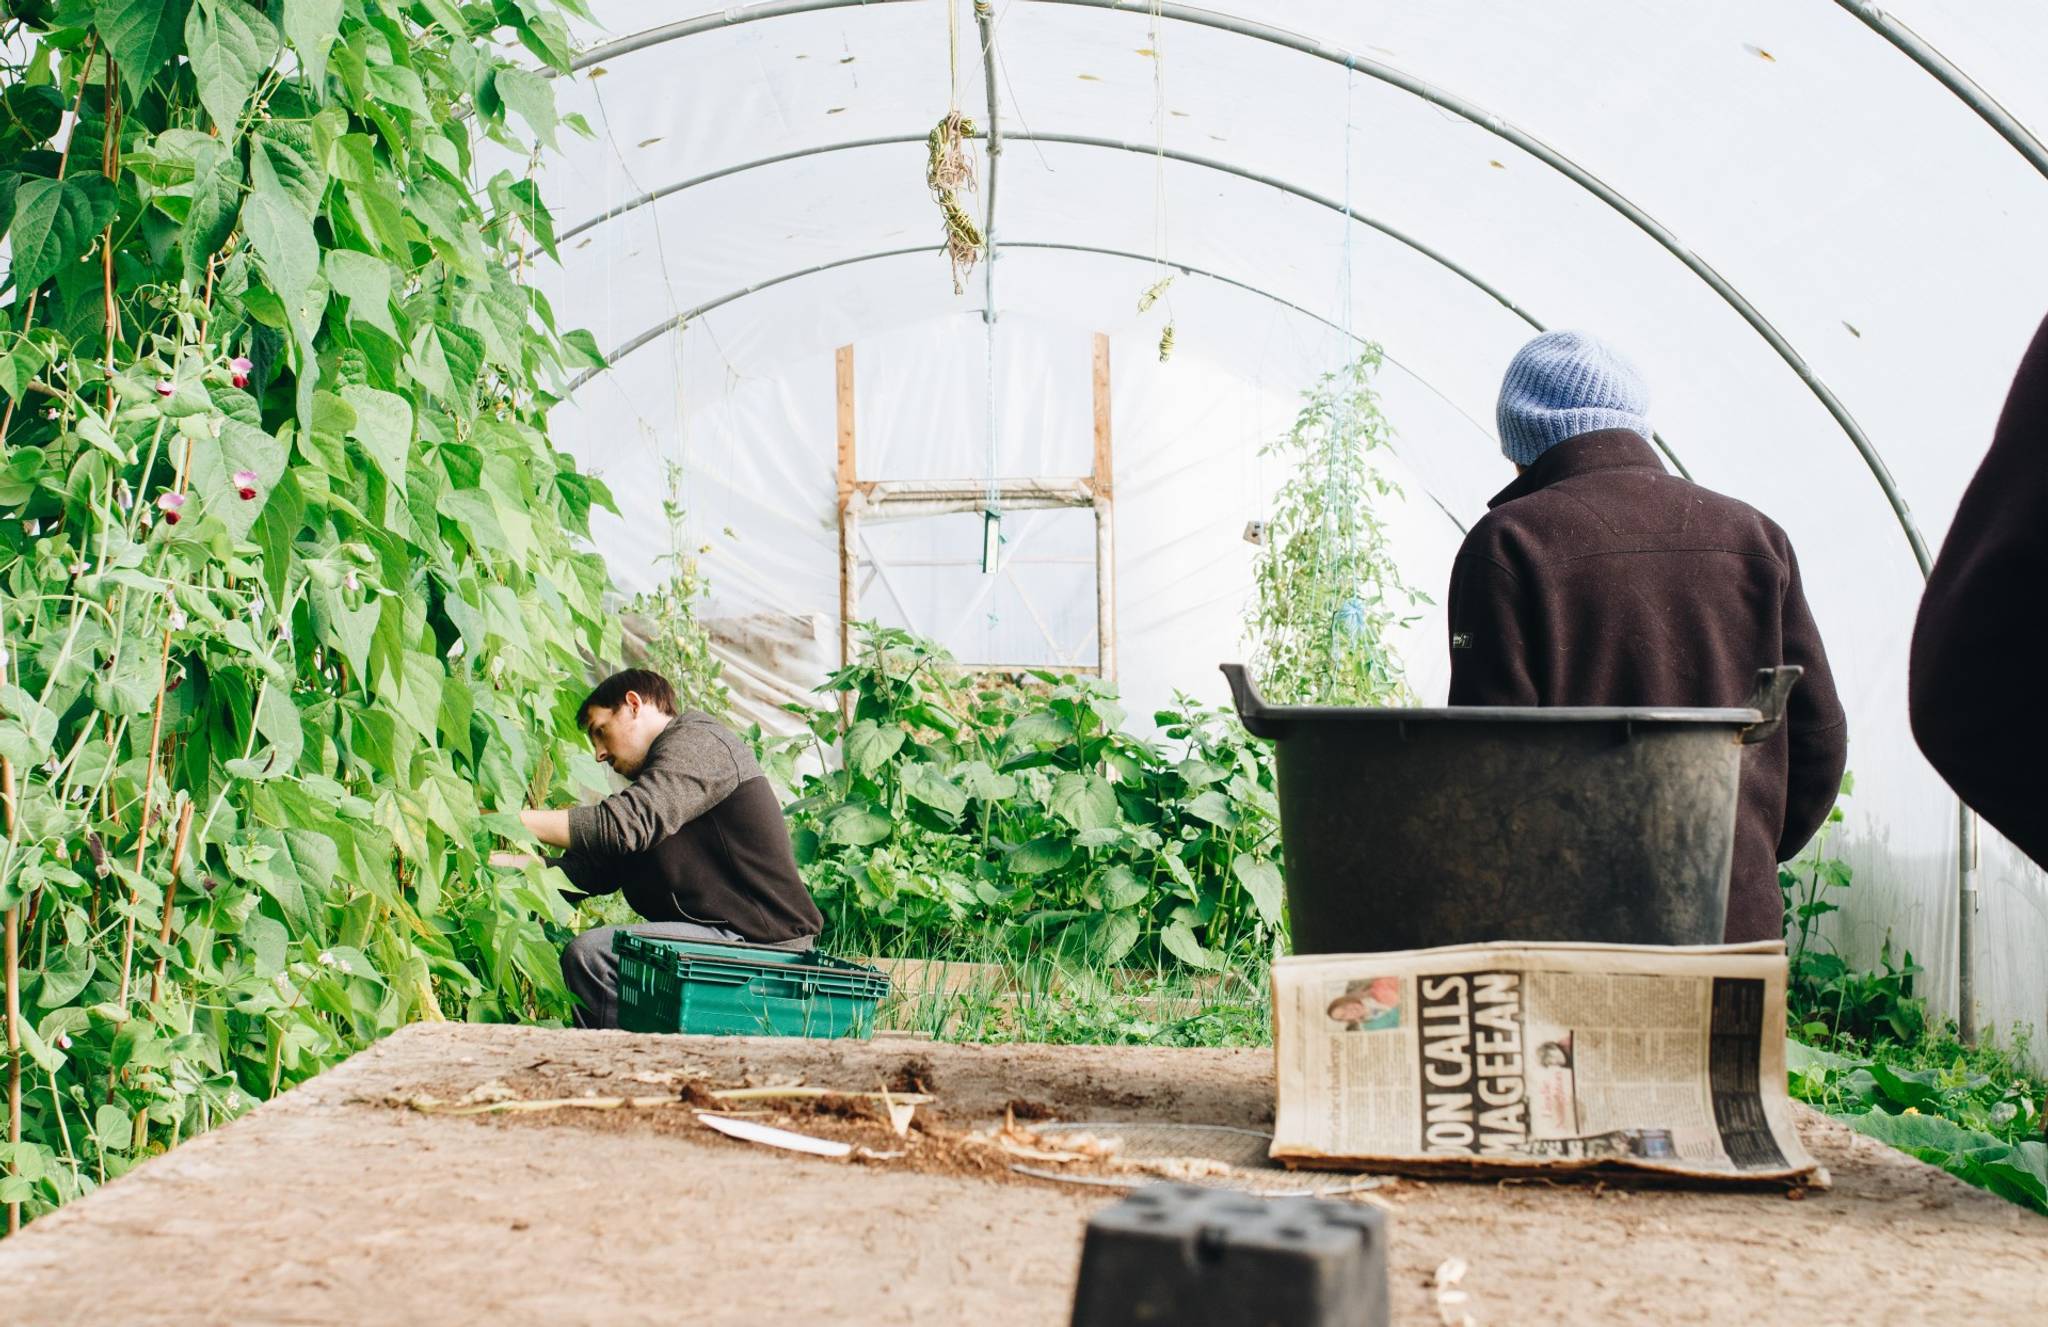 Urban farmers could help curb food insecurity